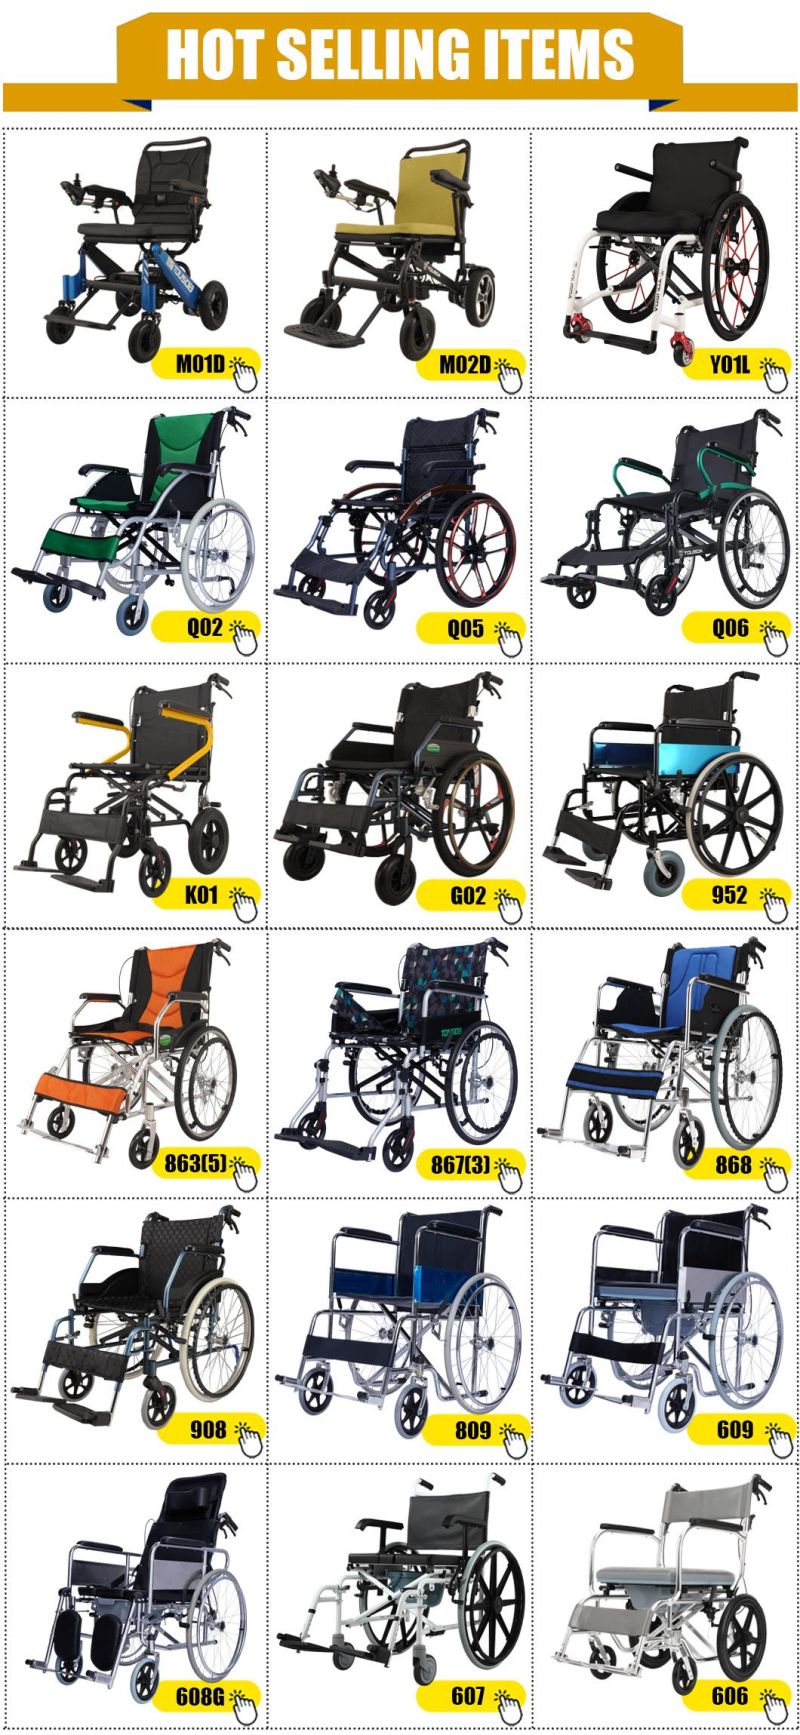 New Arrival Physical Therapy Rehabilitation Equipment Healthcare Home Health Care Heavy Duty Durable Strong Compact Shock Absorbing Suspension System Wheelchair